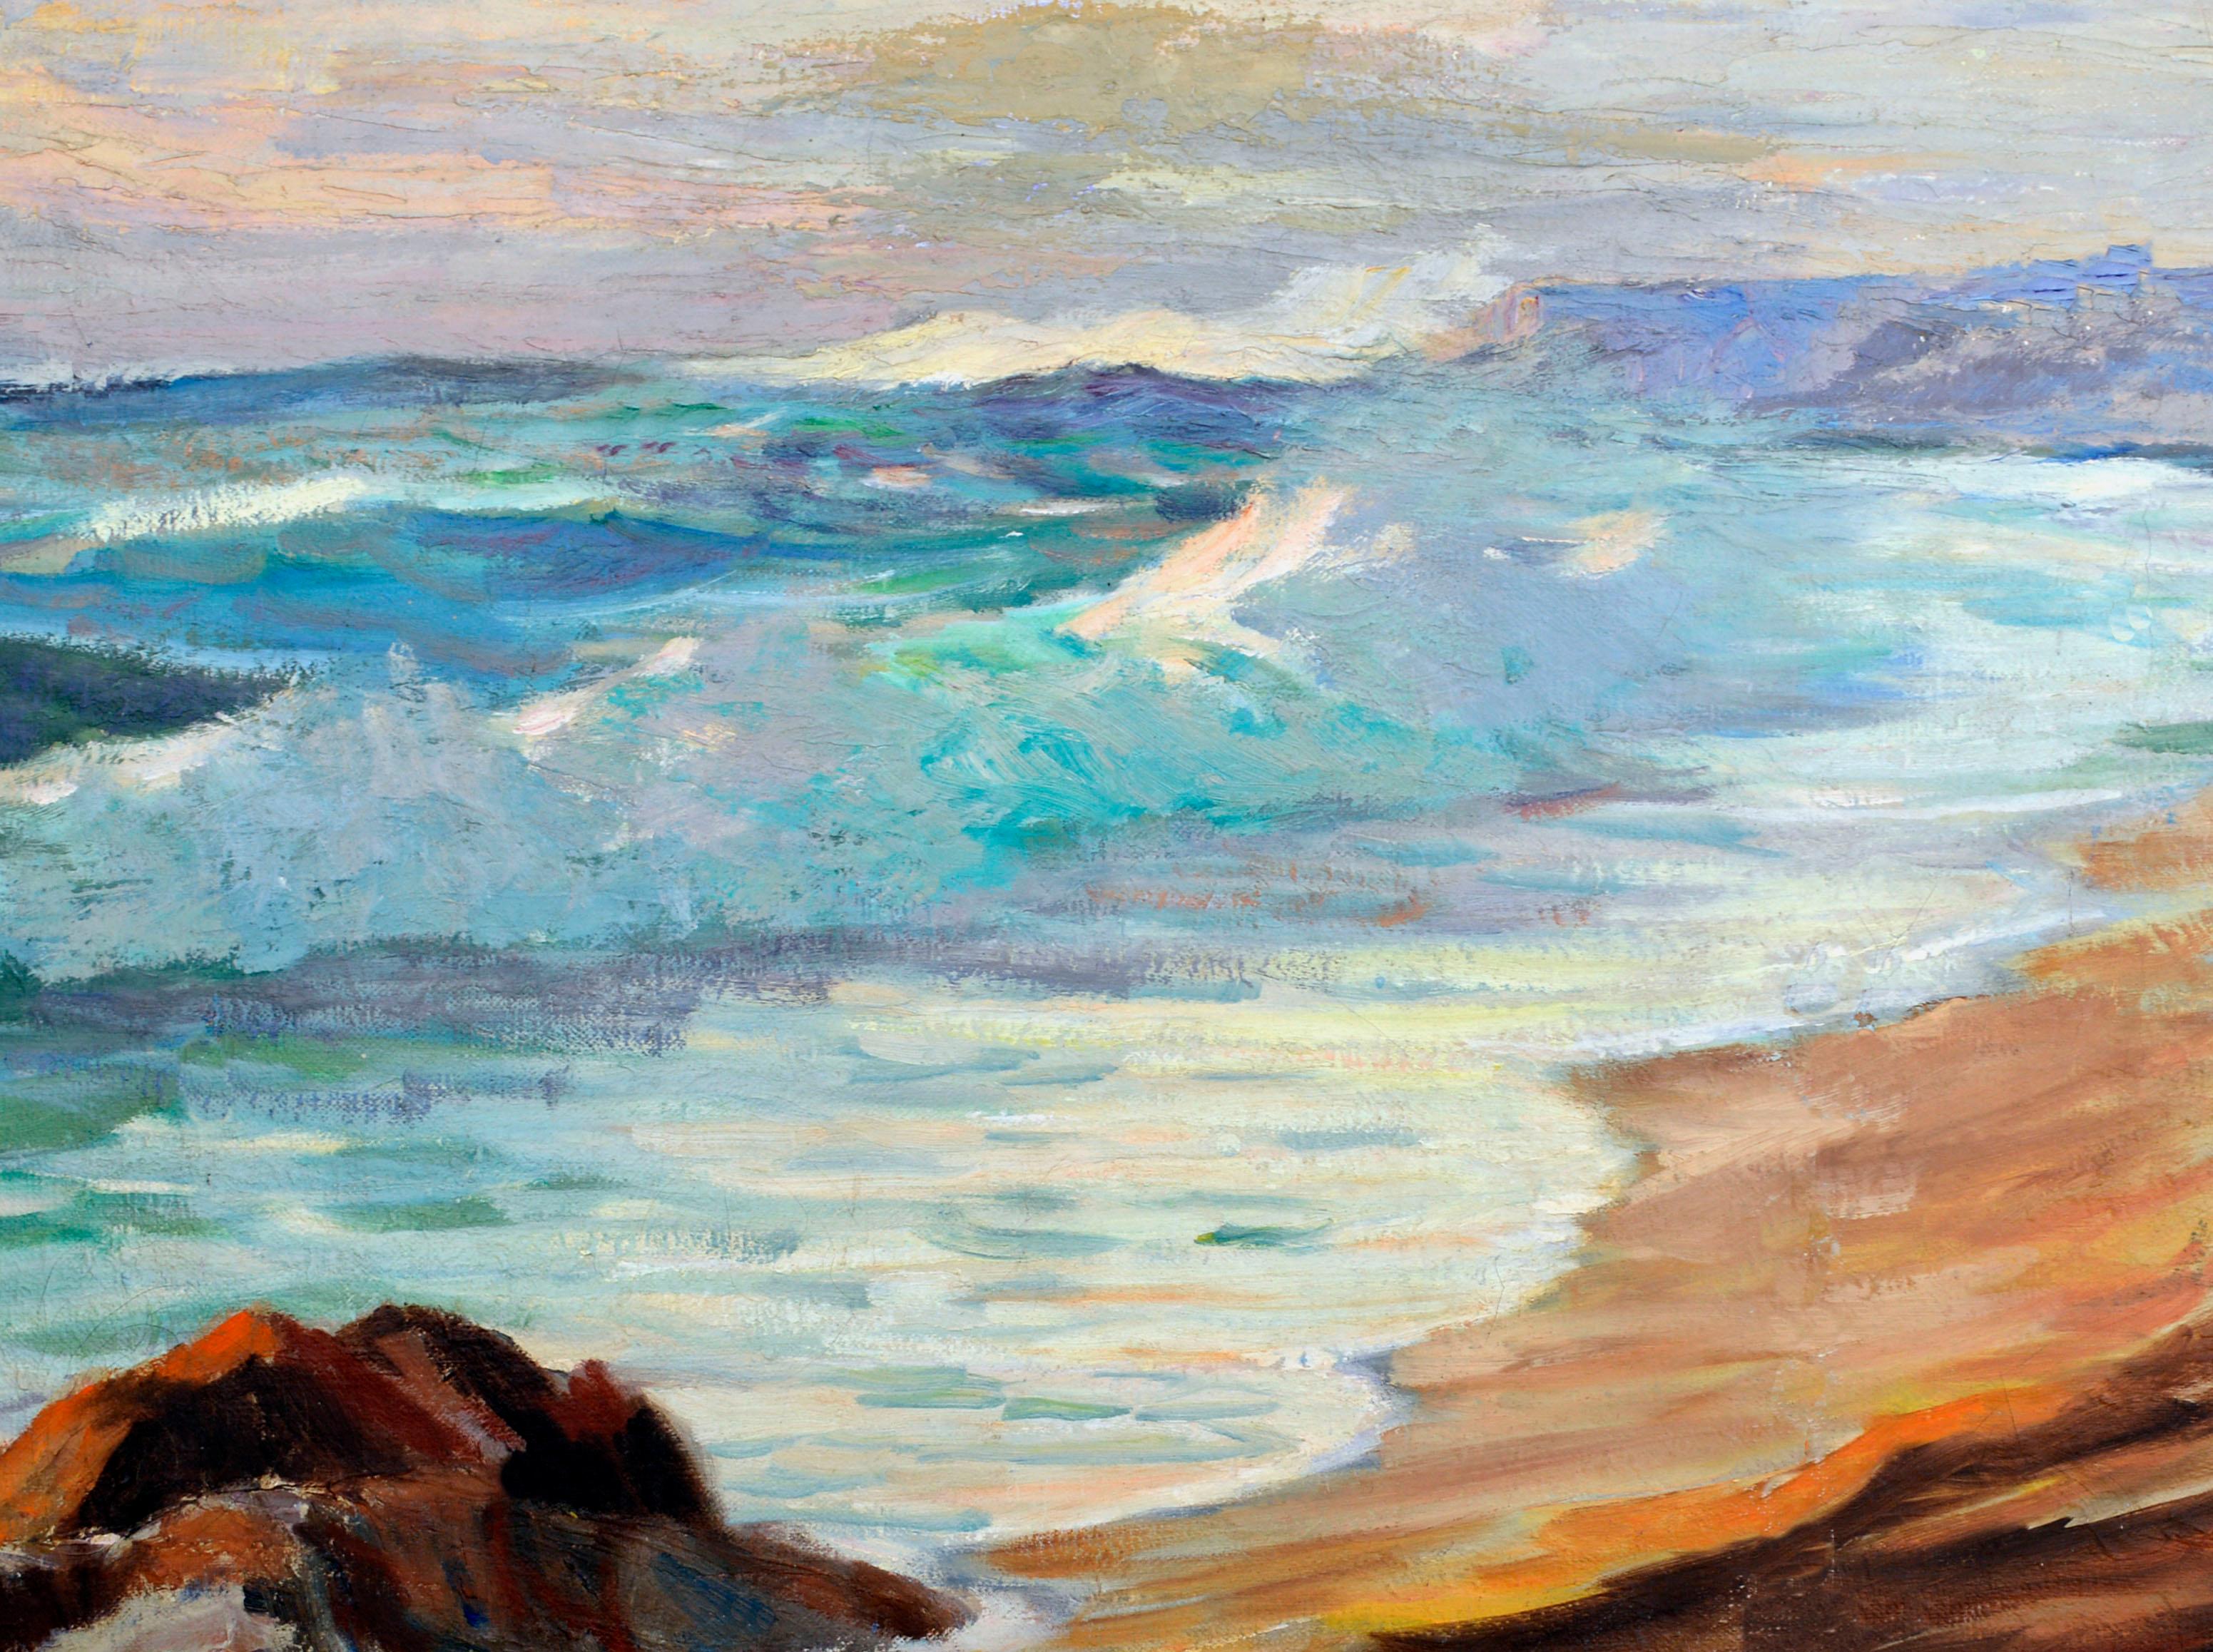 Northern California Coastline Seascape Landscape - Painting by Hartzell Harrison Ray